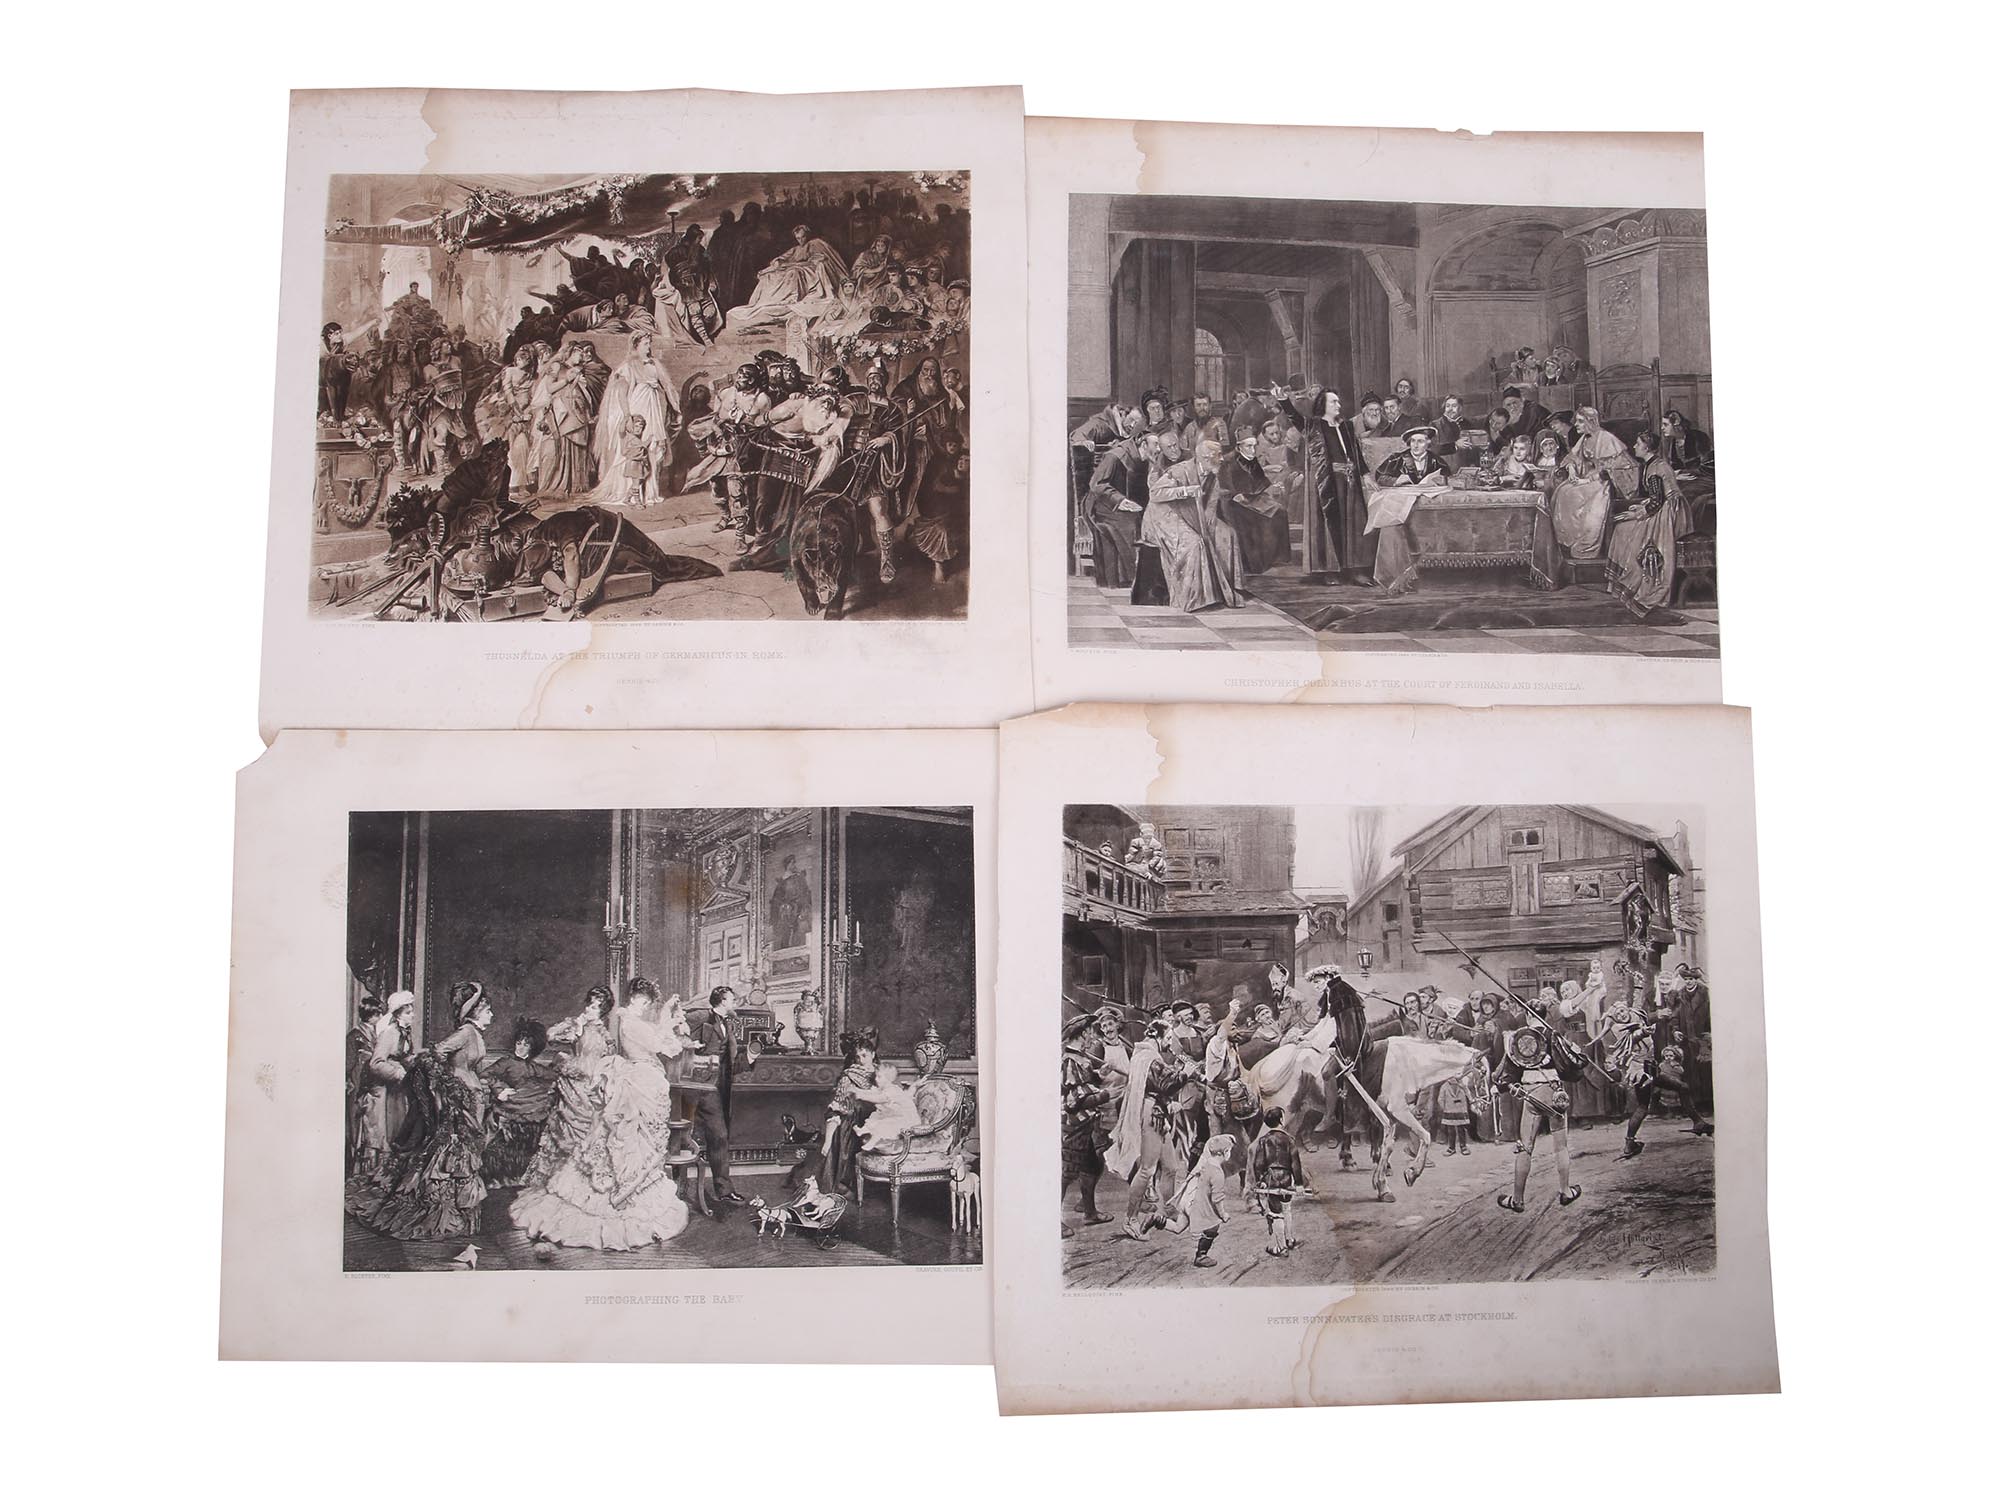 ANTIQUE 19TH CENTURY HISTORICAL ART ETCHINGS